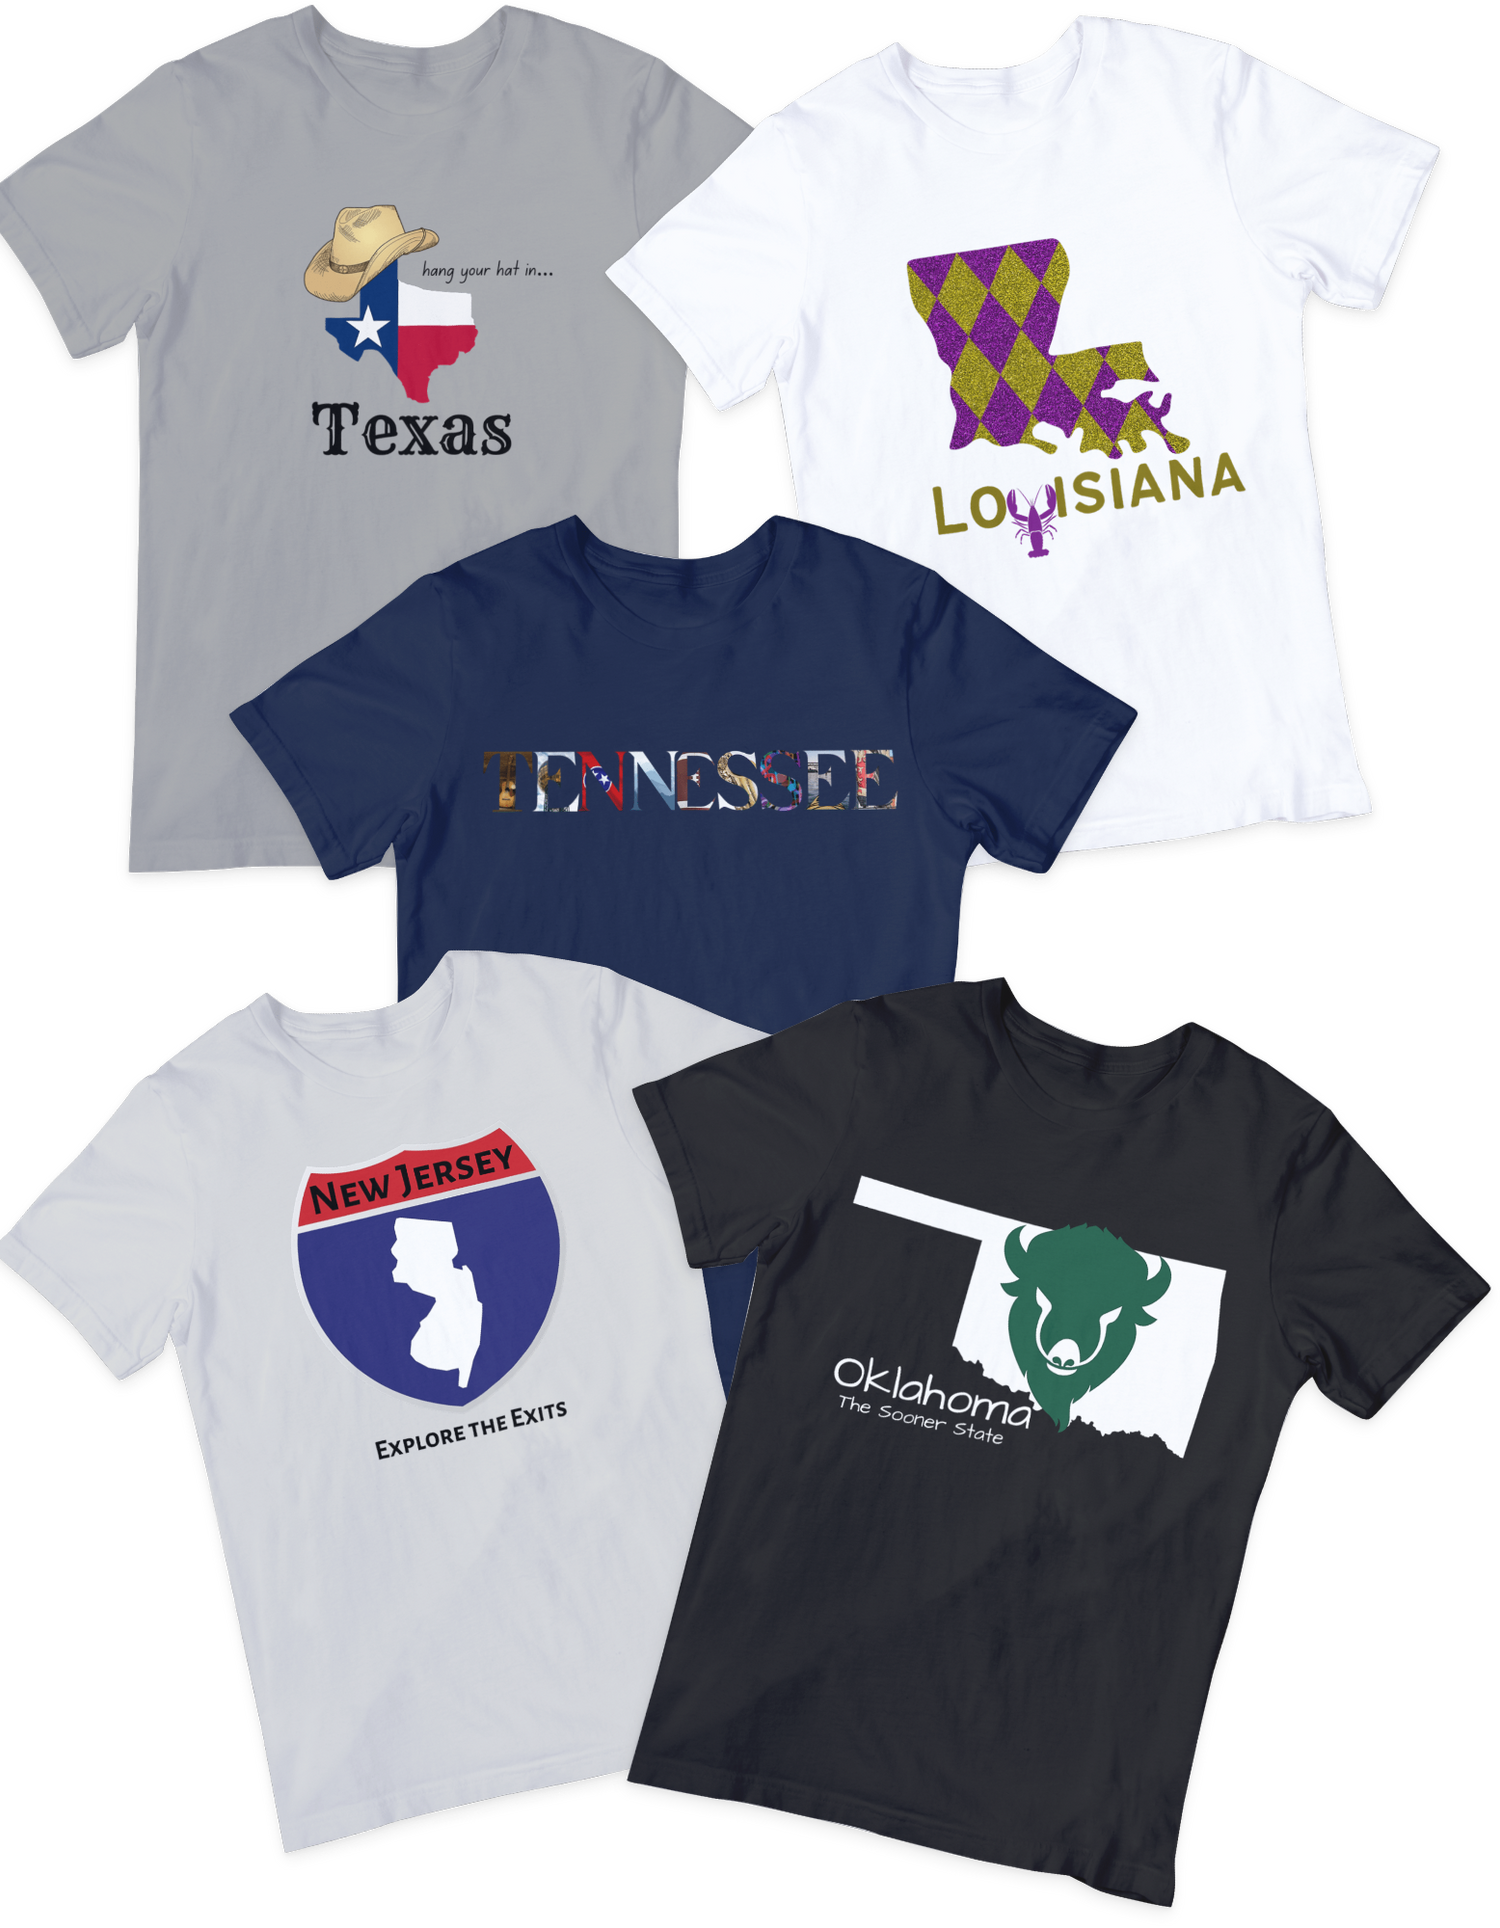 Collage of state t-shirts including: New Jersey, Oklahoma, Tennessee, Texas and Louisiana